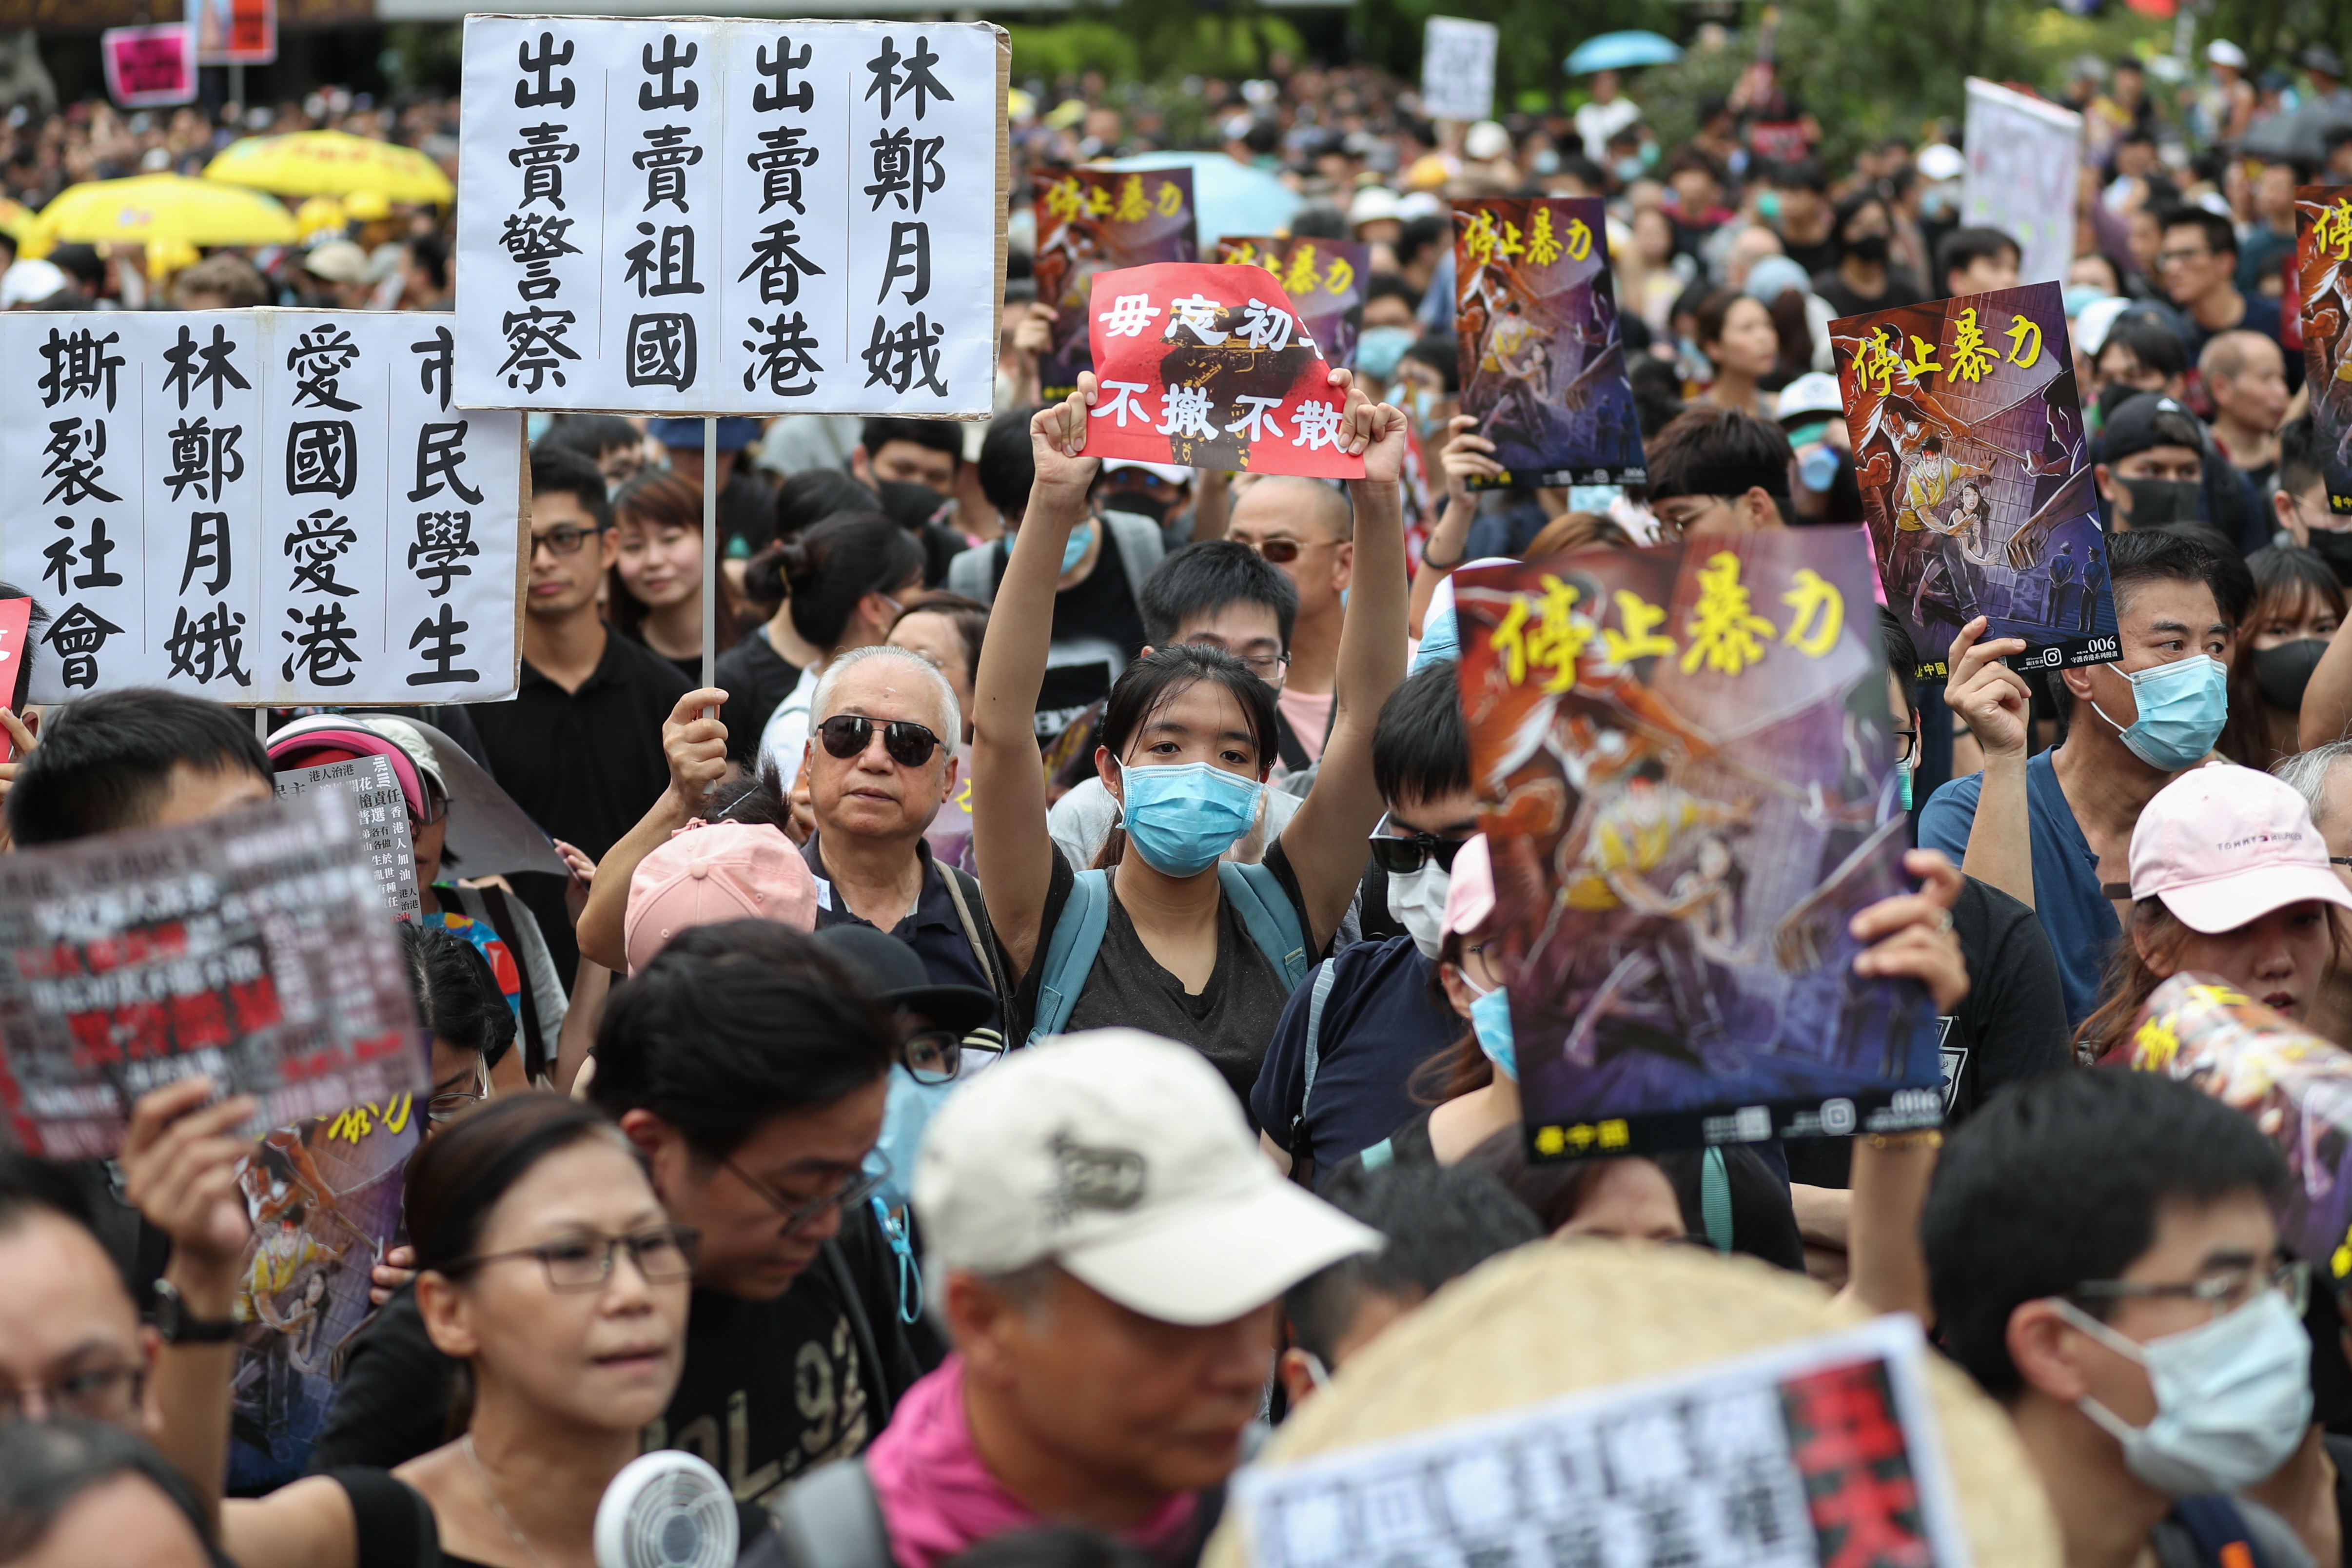 epa07745464 Anti-extradition bill protesters take part in a rally against the police brutality in Hong Kong, China, 28 July 2019. Hong Kong has a new mass rally with demonstrators protesting against the police brutality on 27 July in Yuen Long, another mass protest was held and ended up with clashes between protesters and the police when riot police fired rubber bullets, tear gas and pepper spray to disperse the crowd.  EPA/RITCHIE B. TONGO